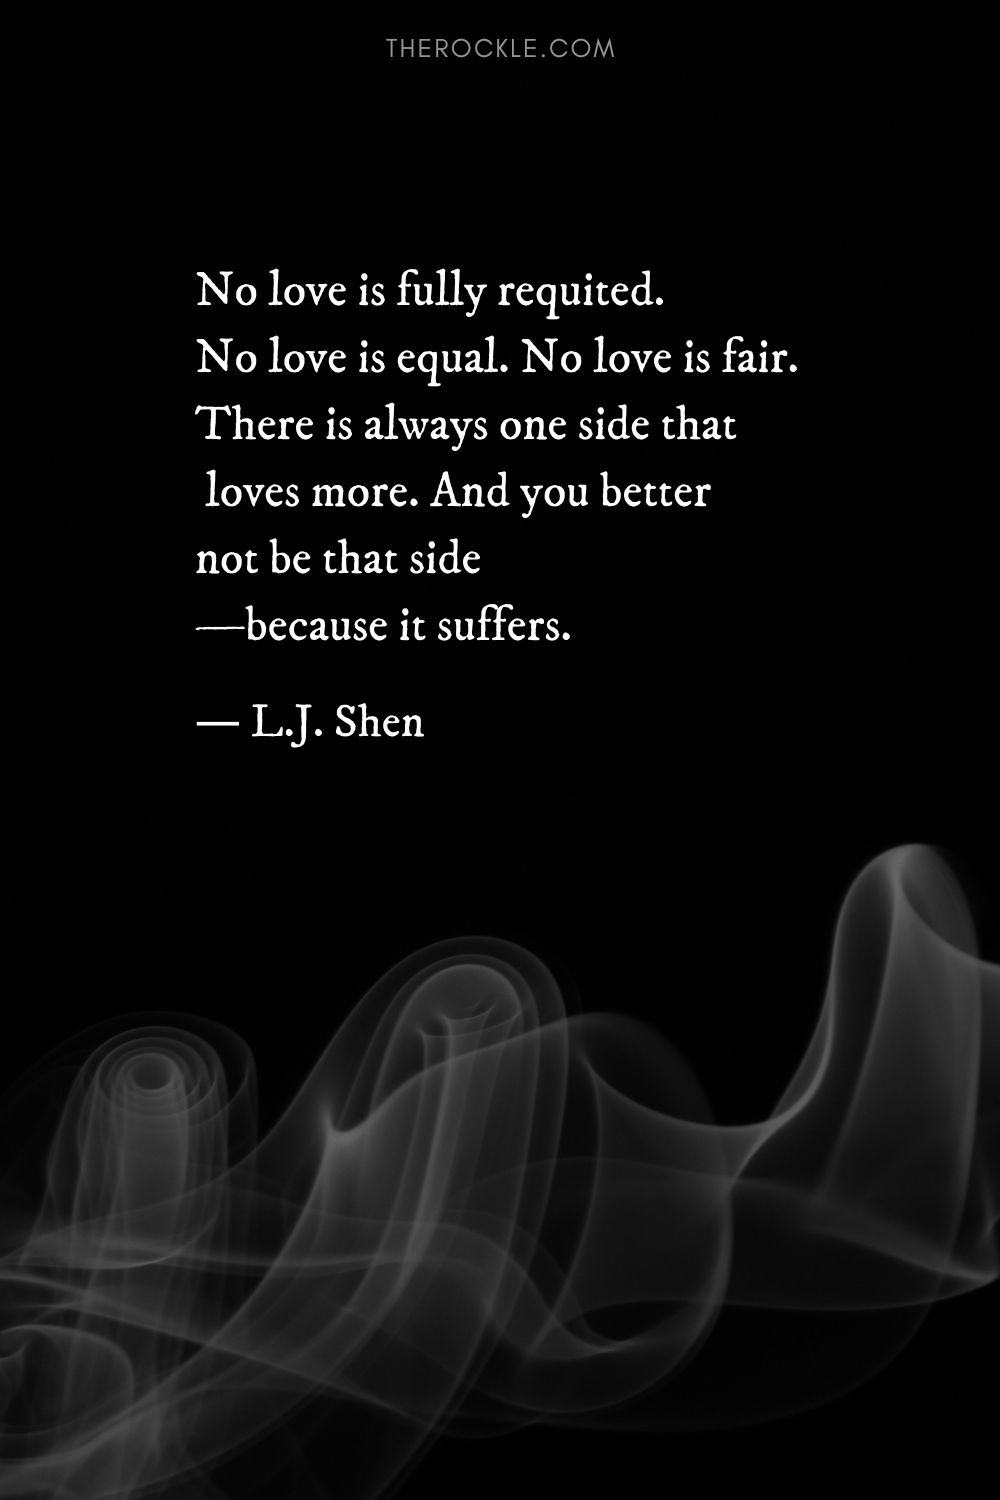 “No love is fully requited. No love is equal. No love is fair. There is always one side that loves more. And you better not be that side—because it suffers.” ― L.J. Shen